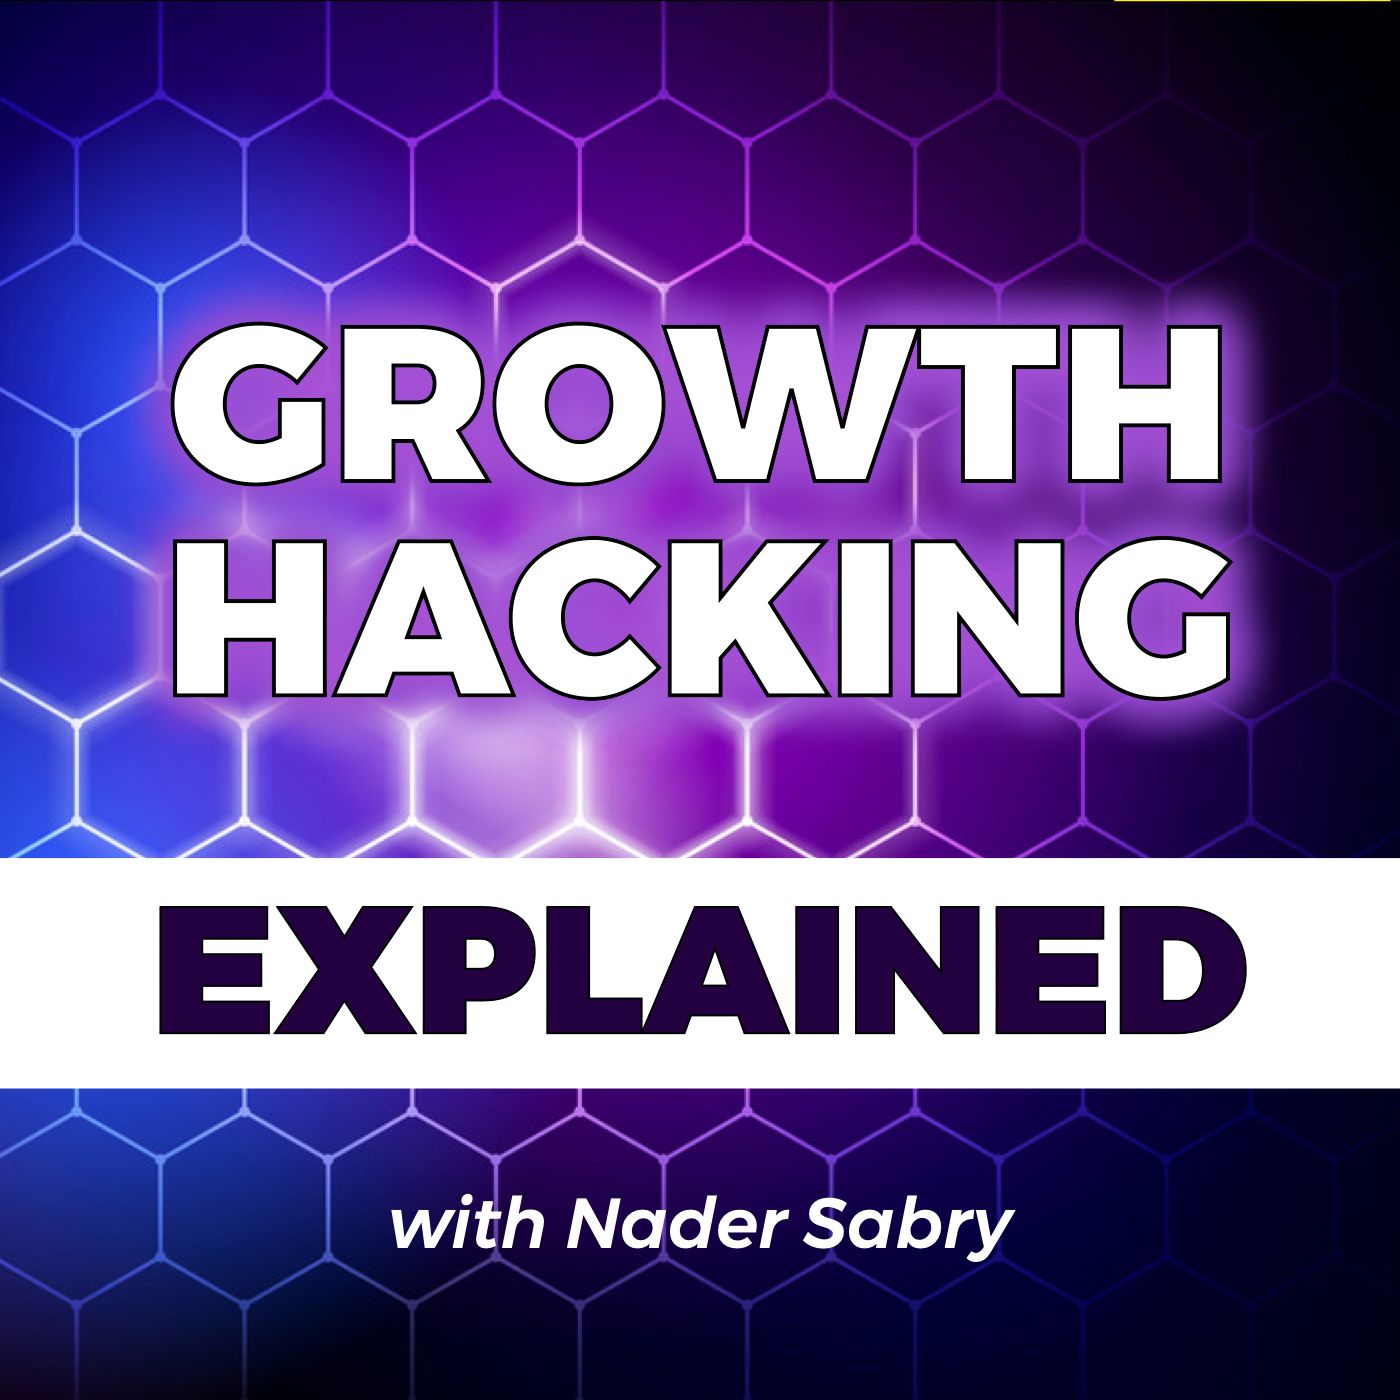 06. What are the best examples of Growth Hacking // Explained by Nader Sabry